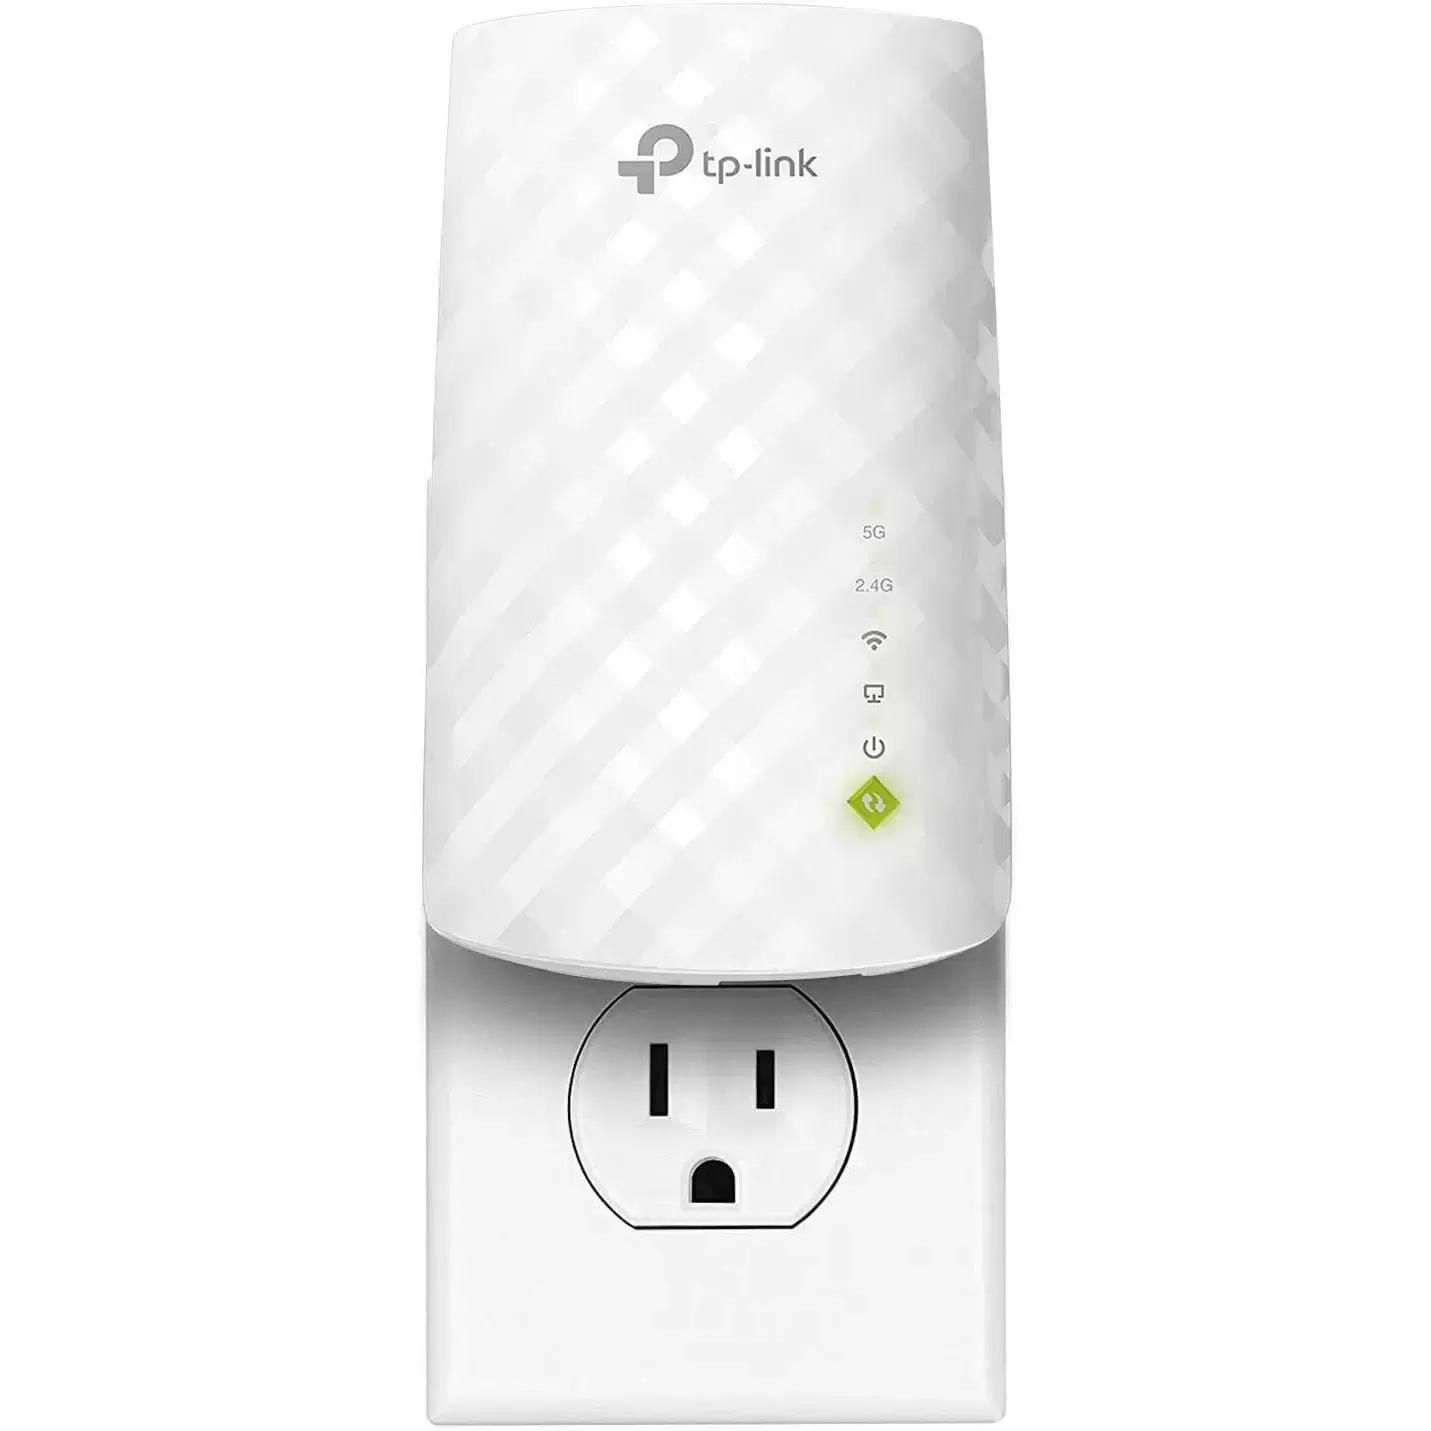 TP-Link RE220 AC750 Dual Band WiFi Range Extender for $13.97